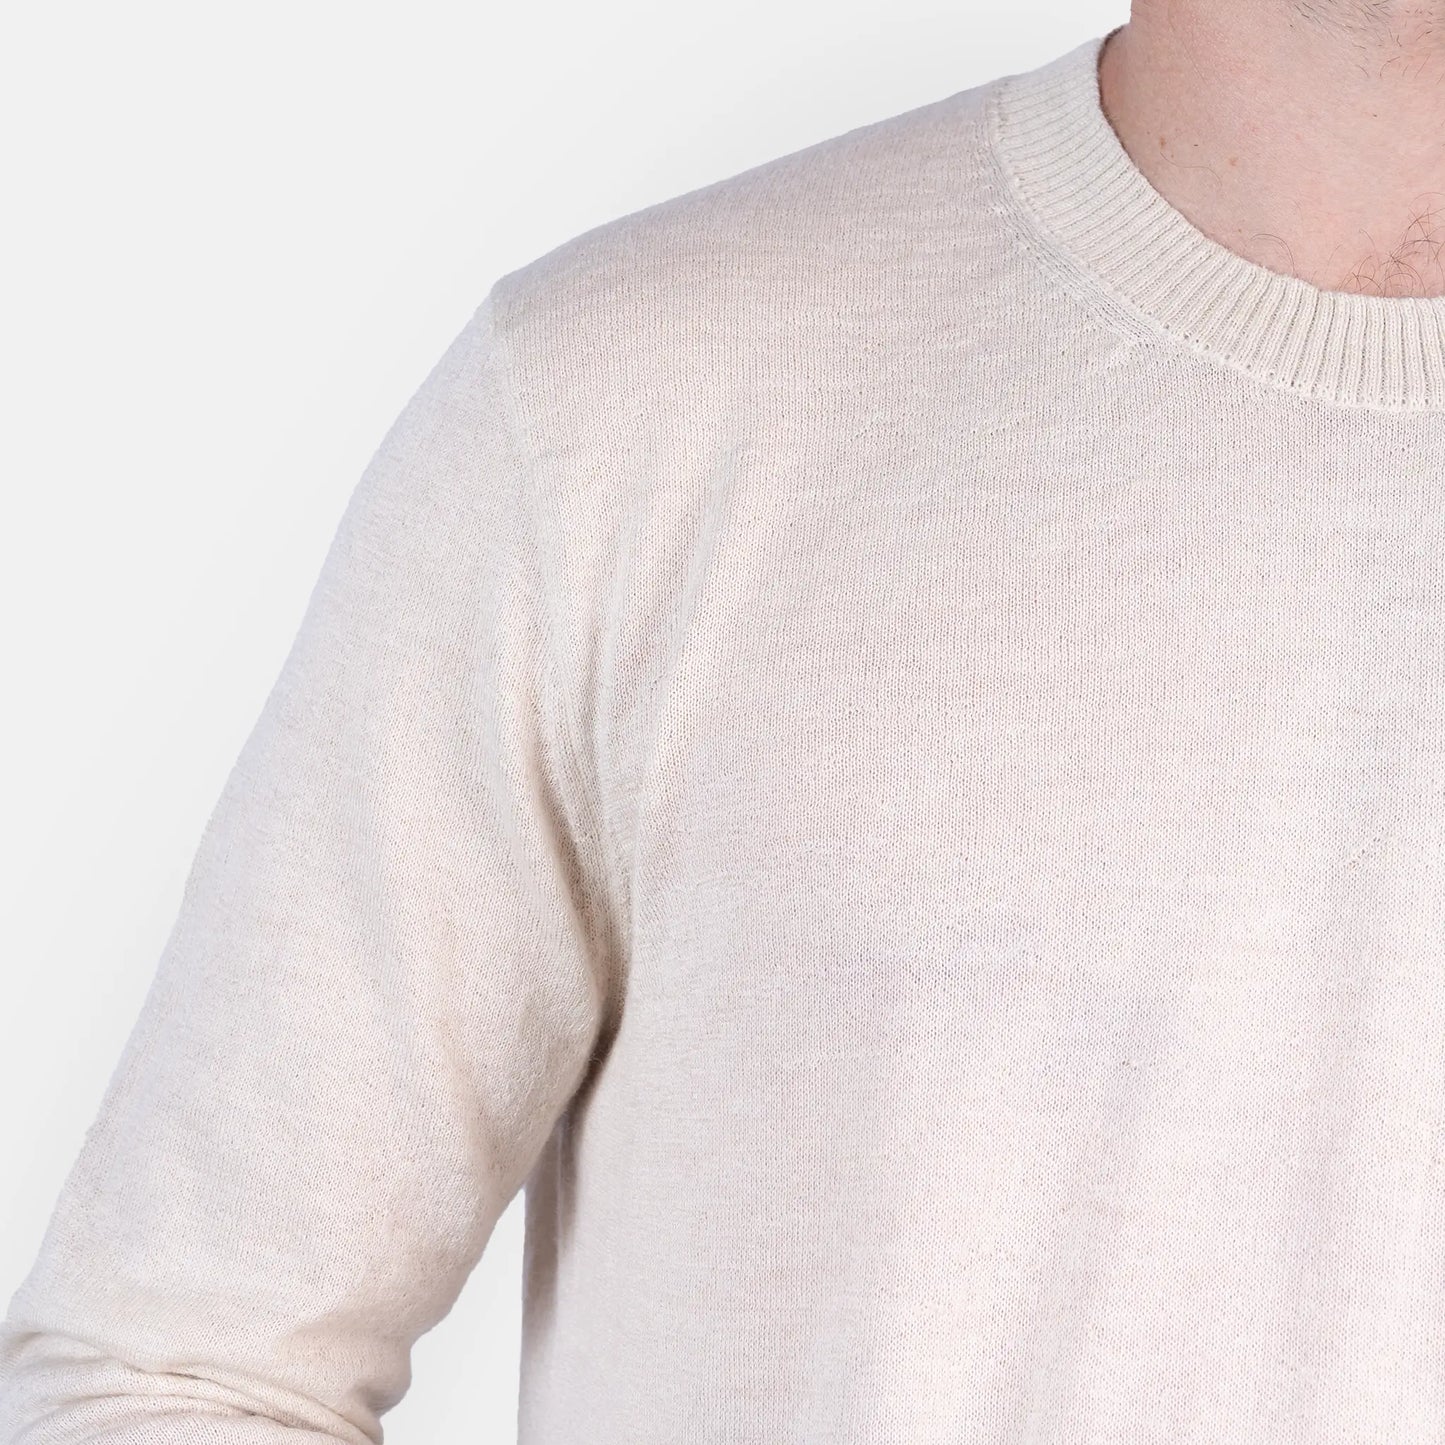 mens alpaca wool sweater natural uv resistance color undyed